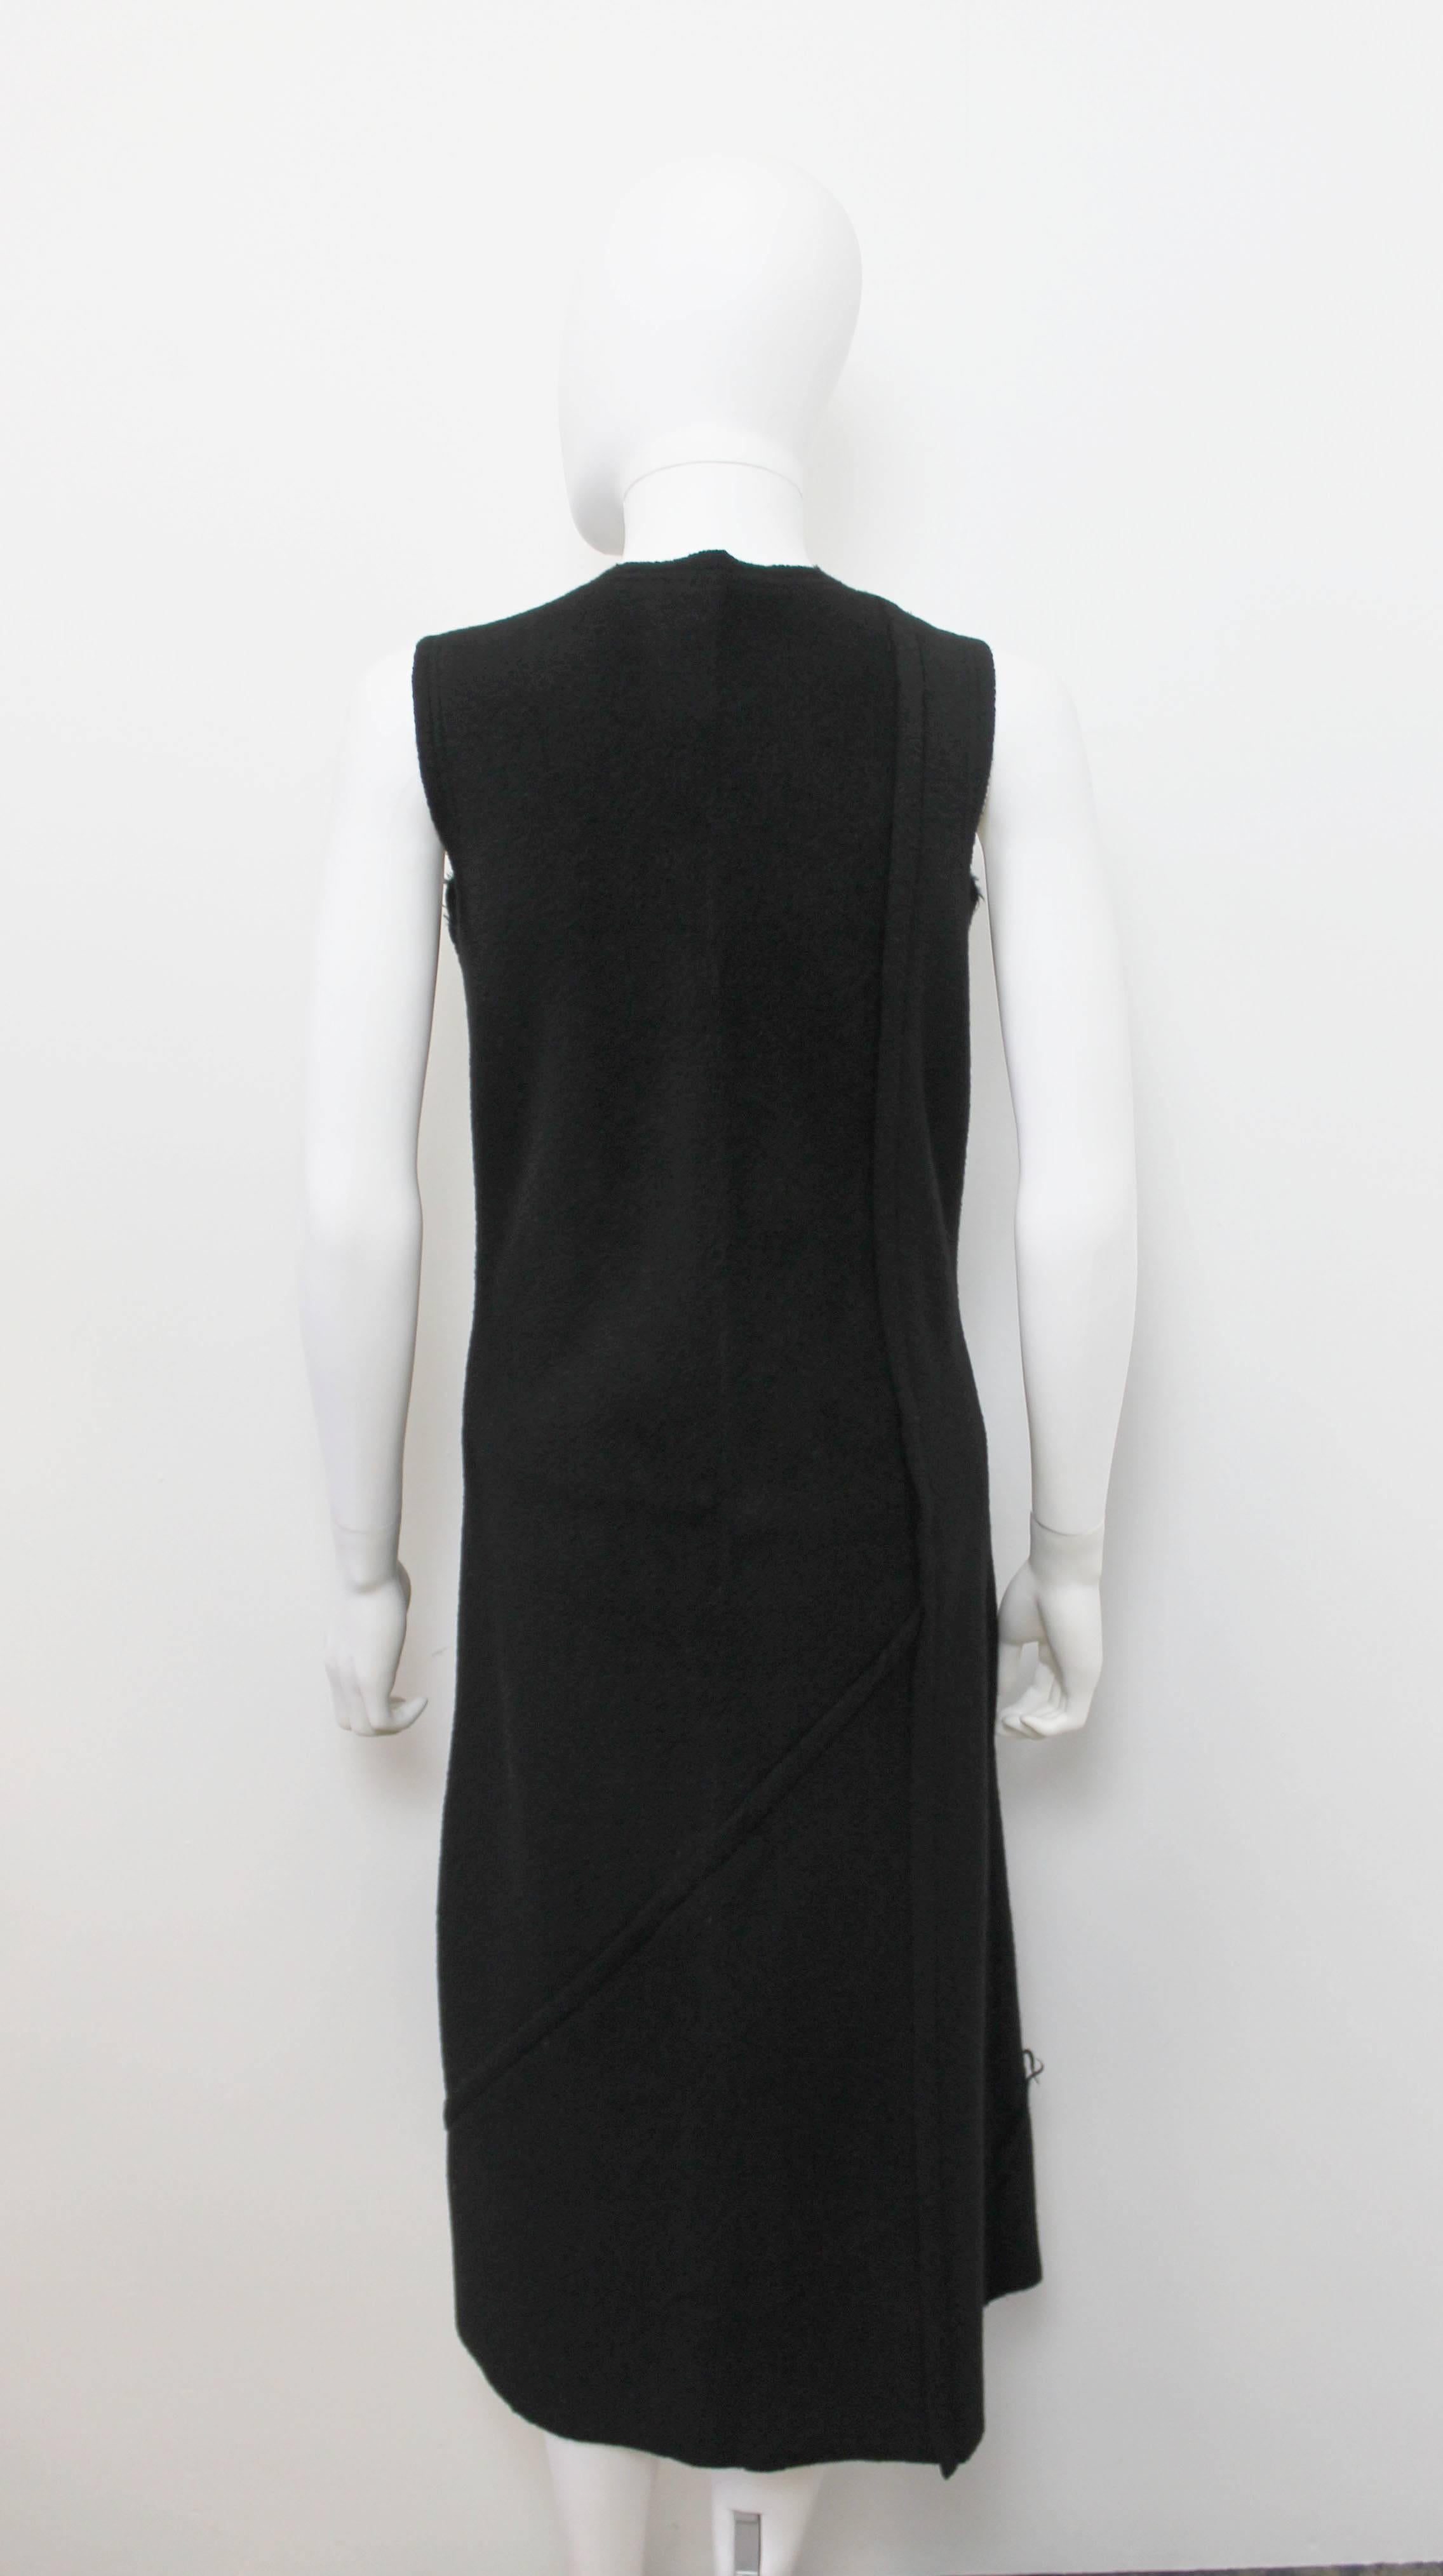 Women's Comme des Garcons Black A-Line Dress With Frayed Neckline and Seams c. 1993